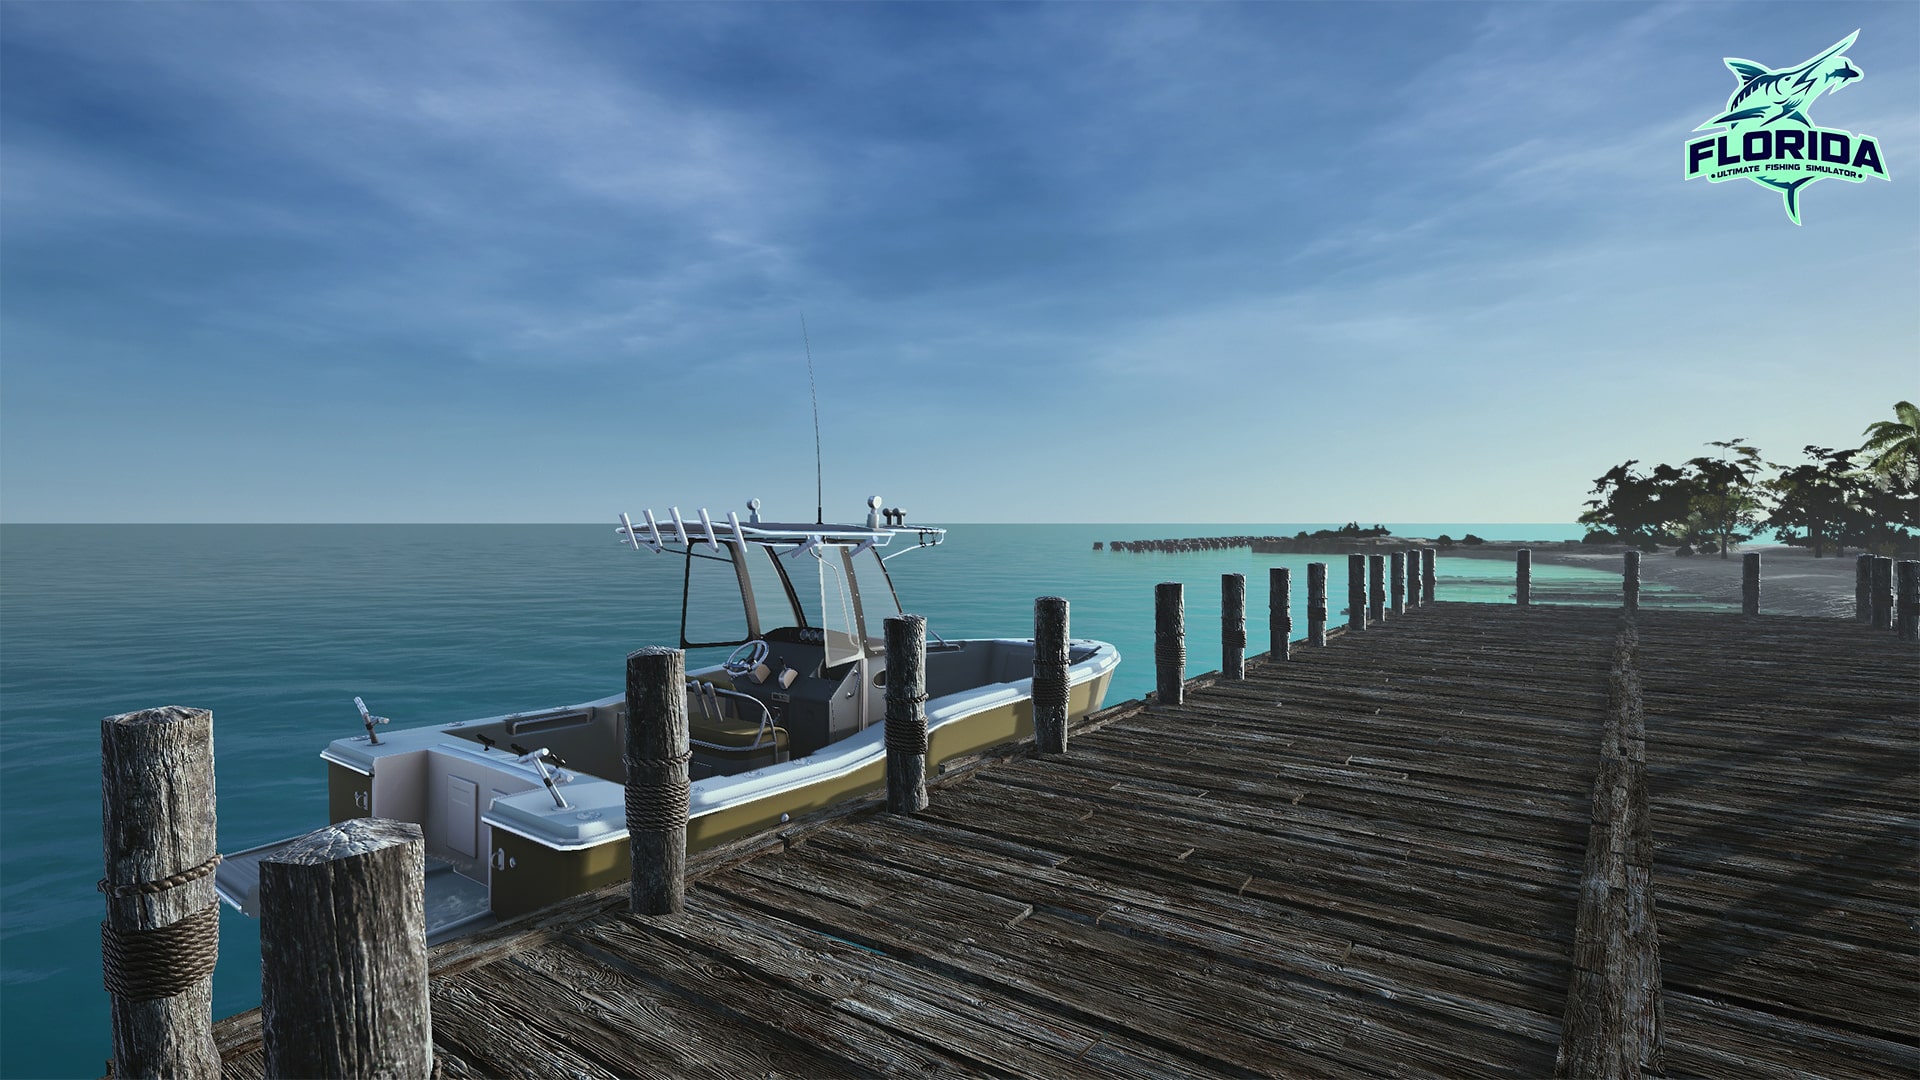 Press release] Ultimate Fishing Simulator with new DLC. It's time